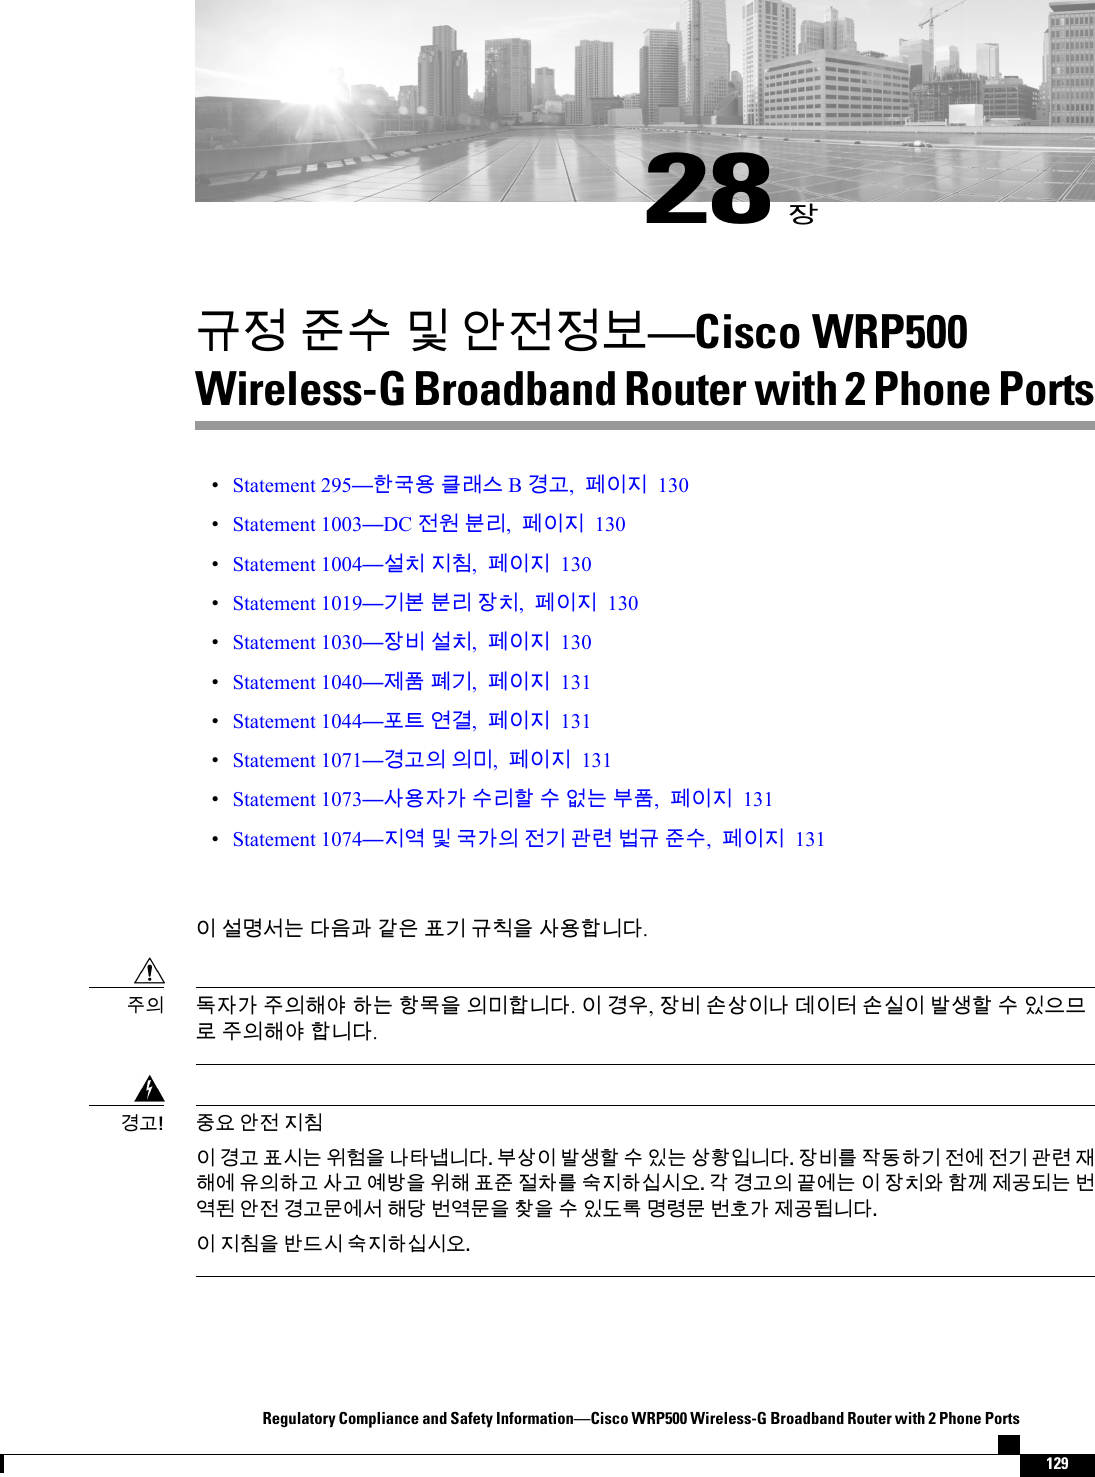 28󹡛󷺒󹣋 󹦶󹋎 󸳅 󹗾󹢺󹣋󸶪Cisco WRP500Wireless-G Broadband Router with 2 Phone PortsStatement 295󺘒󷸣󹝟 󺄪󸡎󹍚 B󷵳󷶖,󺑎󹠪󹩶 130Statement 1003DC 󹢺󹞆 󸸺󸩢,󺑎󹠪󹩶 130Statement 1004󹇚󹼎 󹩶󹼞,󺑎󹠪󹩶 130Statement 1019󷻦󸶮 󸸺󸩢 󹡛󹼎,󺑎󹠪󹩶 130Statement 1030󹡛󸻺 󹇚󹼎,󺑎󹠪󹩶 130Statement 1040󹣒󺔾 󺒆󷻦,󺑎󹠪󹩶 131Statement 1044󺒢󺍮 󹚦󷵦,󺑎󹠪󹩶 131Statement 1071󷵳󷶖󹠎 󹠎󸲮,󺑎󹠪󹩶 131Statement 1073󹅢󹝟󹡆󷲶 󹋎󸩢󺘖 󹋎 󹙼󸍊 󸸶󺔾,󺑎󹠪󹩶 131Statement 1074󹩶󹚣 󸳅 󷸣󷲶󹠎 󹢺󷻦 󷶶󸣞 󸵋󷺒 󹦶󹋎,󺑎󹠪󹩶 131󹠪 󹇚󸬻󹇒󸍊 󸎚󹠂󷶲 󷳏󹟶 󺔒󷻦 󷺒󹼏󹟺 󹅢󹝟󺘟󸍾󸎚.󸑻󹡆󷲶 󹦲󹠎󺘪󹘲 󺘎󸍊 󺘣󸭟󹟺 󹠎󸲮󺘟󸍾󸎚.󹠪 󷵳󹝦,󹡛󸻺 󹉆󹅷󹠪󸅎 󸐦󹠪󺇦 󹉆󹎚󹠪 󸳒󹆓󺘖 󹋎 󹠾󹟲󸱶󸤒 󹦲󹠎󺘪󹘲 󺘟󸍾󸎚.󹦲󹠎󹧇󹝊 󹗾󹢺 󹩶󹼞󹠪 󷵳󷶖 󺔒󹎒󸍊 󹞺󺚎󹟺 󸅎󺅶󸅻󸍾󸎚. 󸸶󹅷󹠪 󸳒󹆓󺘖 󹋎 󹠾󸍊 󹅷󺜟󹠻󸍾󸎚. 󹡛󸻺󸨲 󹡇󸒏󺘎󷻦 󹢺󹚆 󹢺󷻦 󷶶󸣞 󹡢󺘪󹚆 󹟖󹠎󺘎󷶖 󹅢󷶖 󹚾󸳟󹟺 󹞺󺘪 󺔒󹦶 󹢾󹳞󸨲 󹋏󹩶󺘎󹎣󹎒󹛚. 󷲷 󷵳󷶖󹠎 󸄓󹚆󸍊 󹠪 󹡛󹼎󹛶 󺘞󷾎 󹣒󷶫󸓎󸍊 󸴾󹚣󸓒 󹗾󹢺 󷵳󷶖󸯮󹚆󹇒 󺘪󸎯 󸴾󹚣󸯮󹟺 󹳴󹟺 󹋎 󹠾󸑺󸤓 󸬻󸣯󸯮 󸴾󺛮󷲶 󹣒󷶫󸓟󸍾󸎚.󹠪 󹩶󹼞󹟺 󸳎󸖒󹎒 󹋏󹩶󺘎󹎣󹎒󹛚.󷵳󷶖!Regulatory Compliance and Safety InformationCisco WRP500 Wireless-G Broadband Router with 2 Phone Ports129